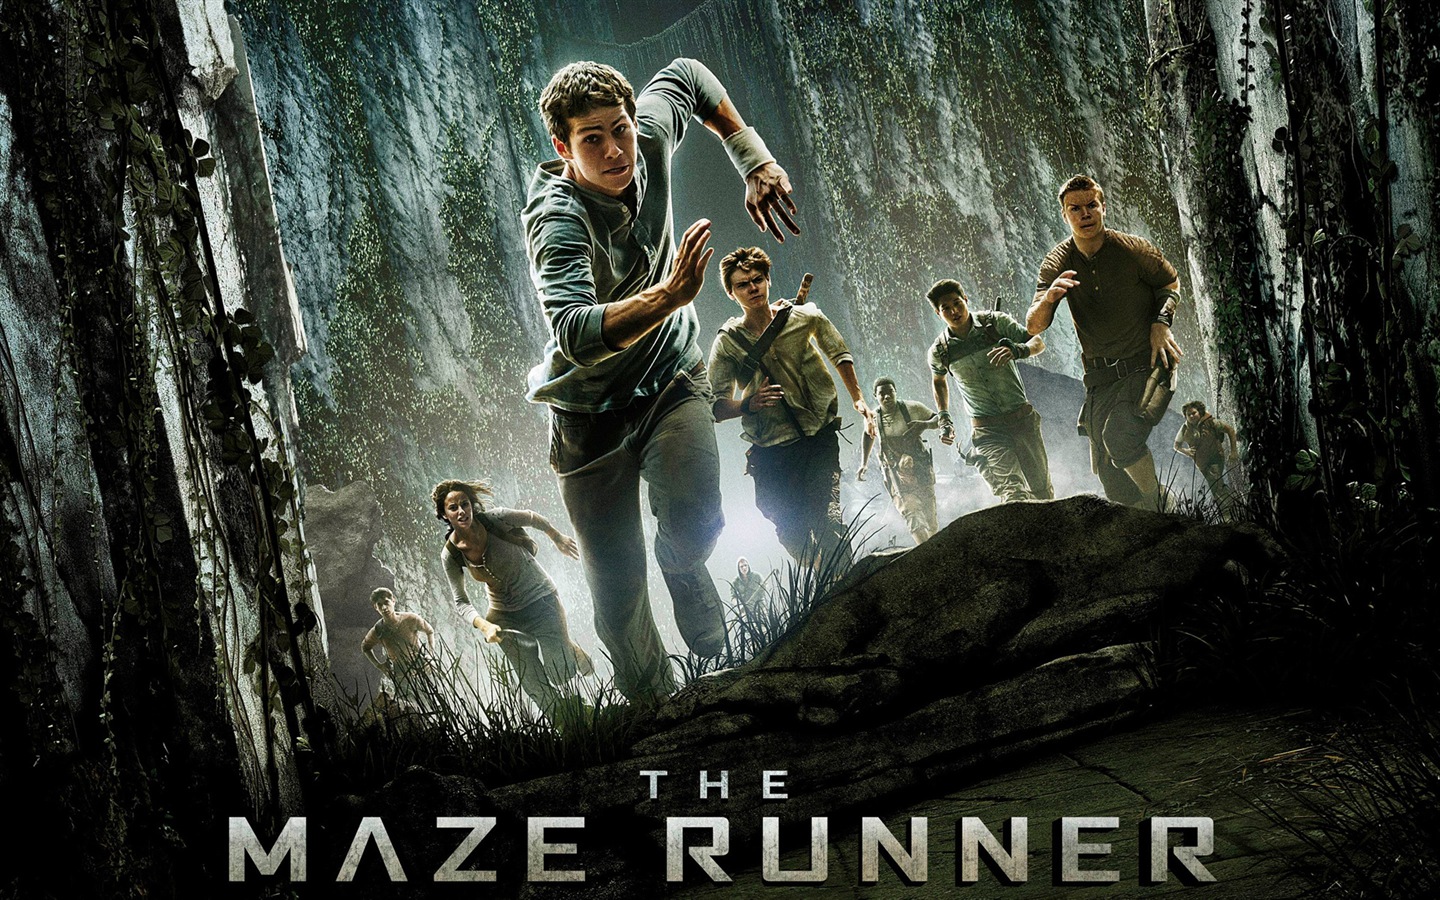 The Maze Runner HD movie wallpapers #2 - 1440x900